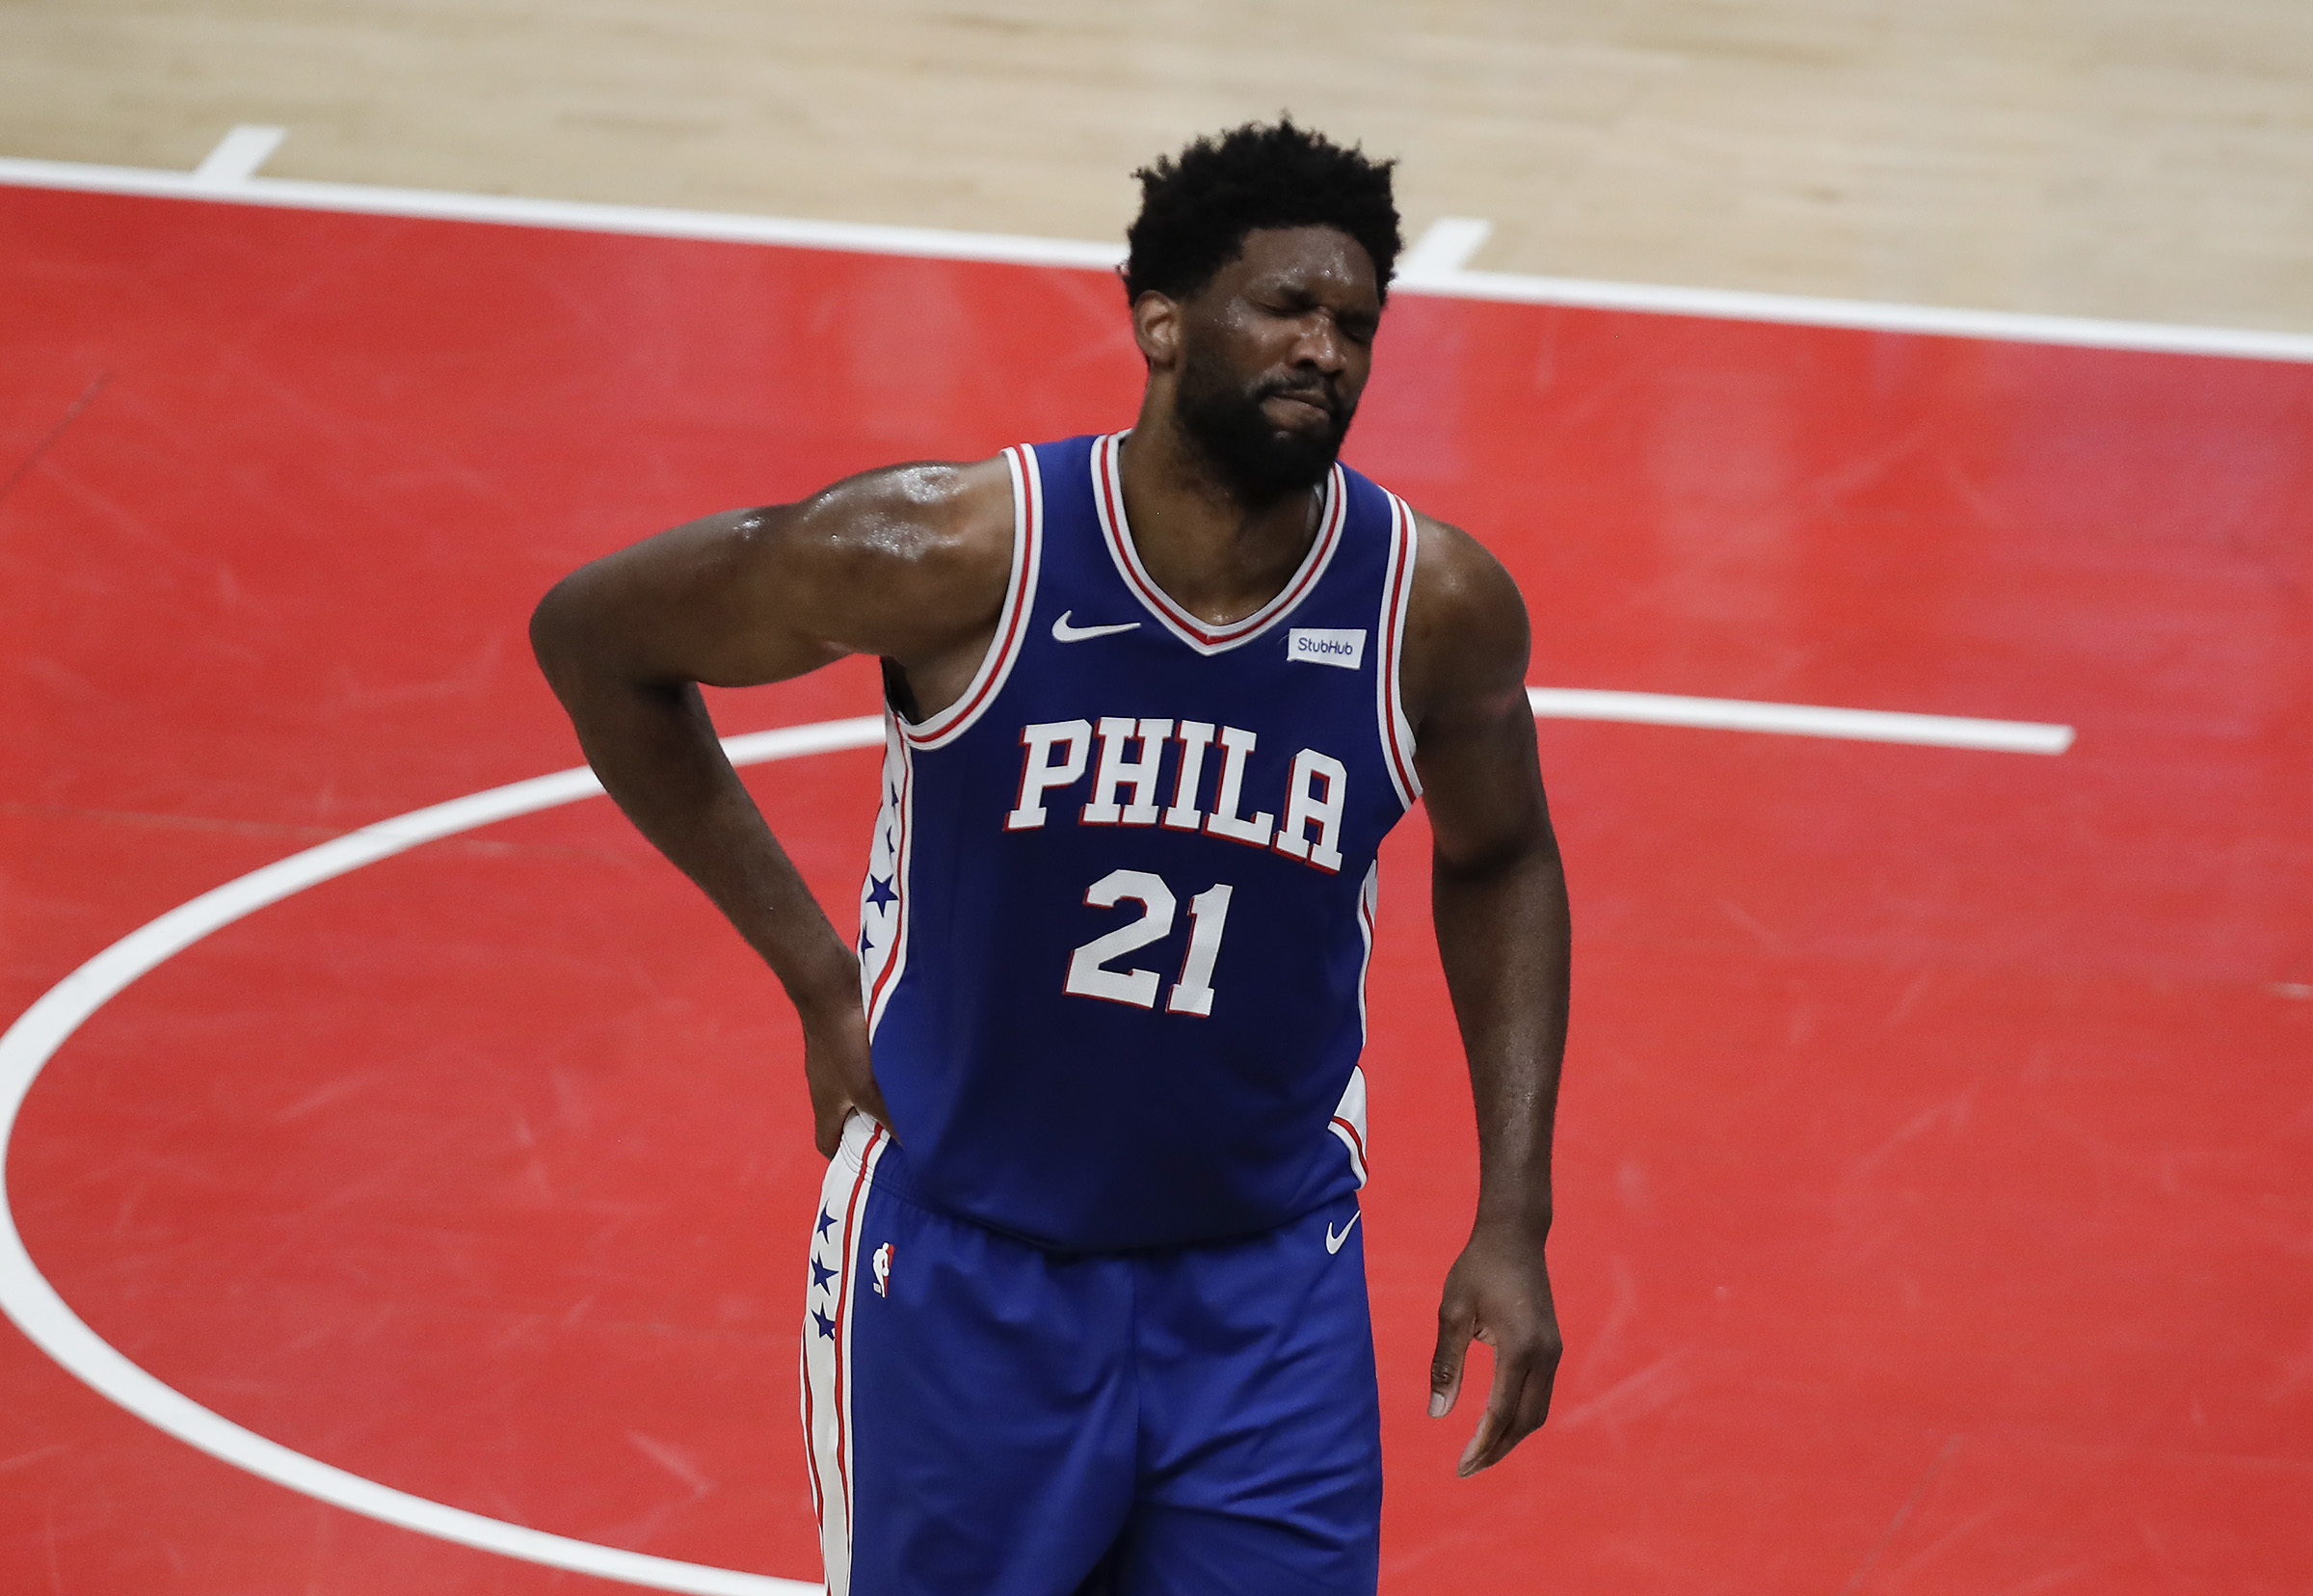 Embiid has given the franchise assurances he is OK riding out the current  drama” - NBA MVP Joel Embiid remains committed to his team, Basketball  Network